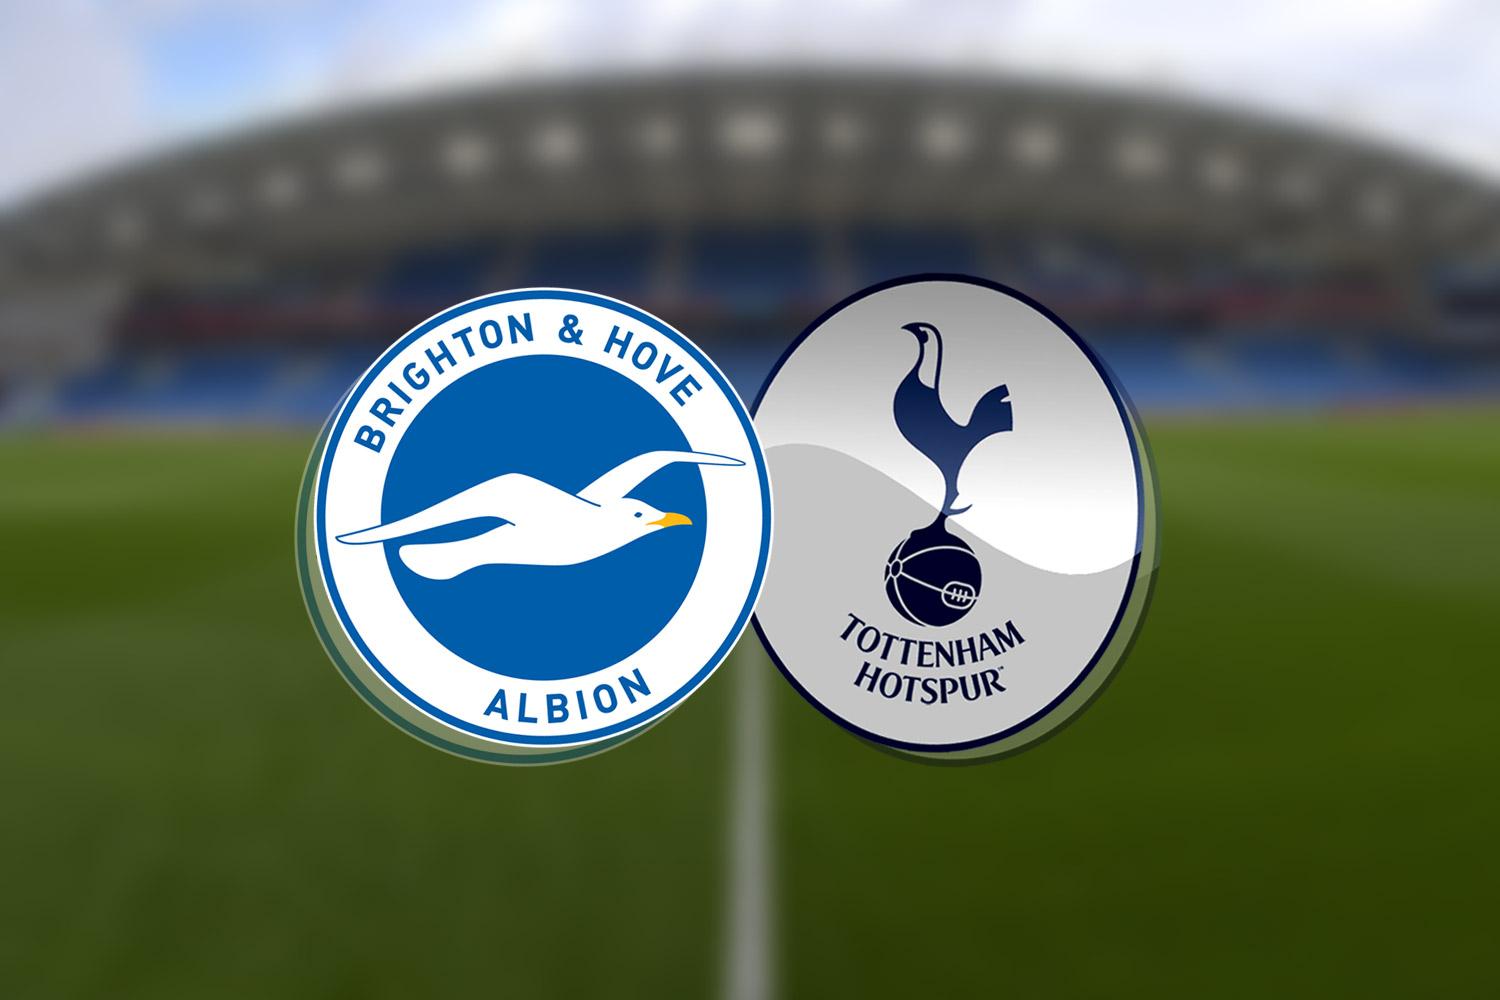 Brighton v Tottenham - Match Preview and Betting Tips